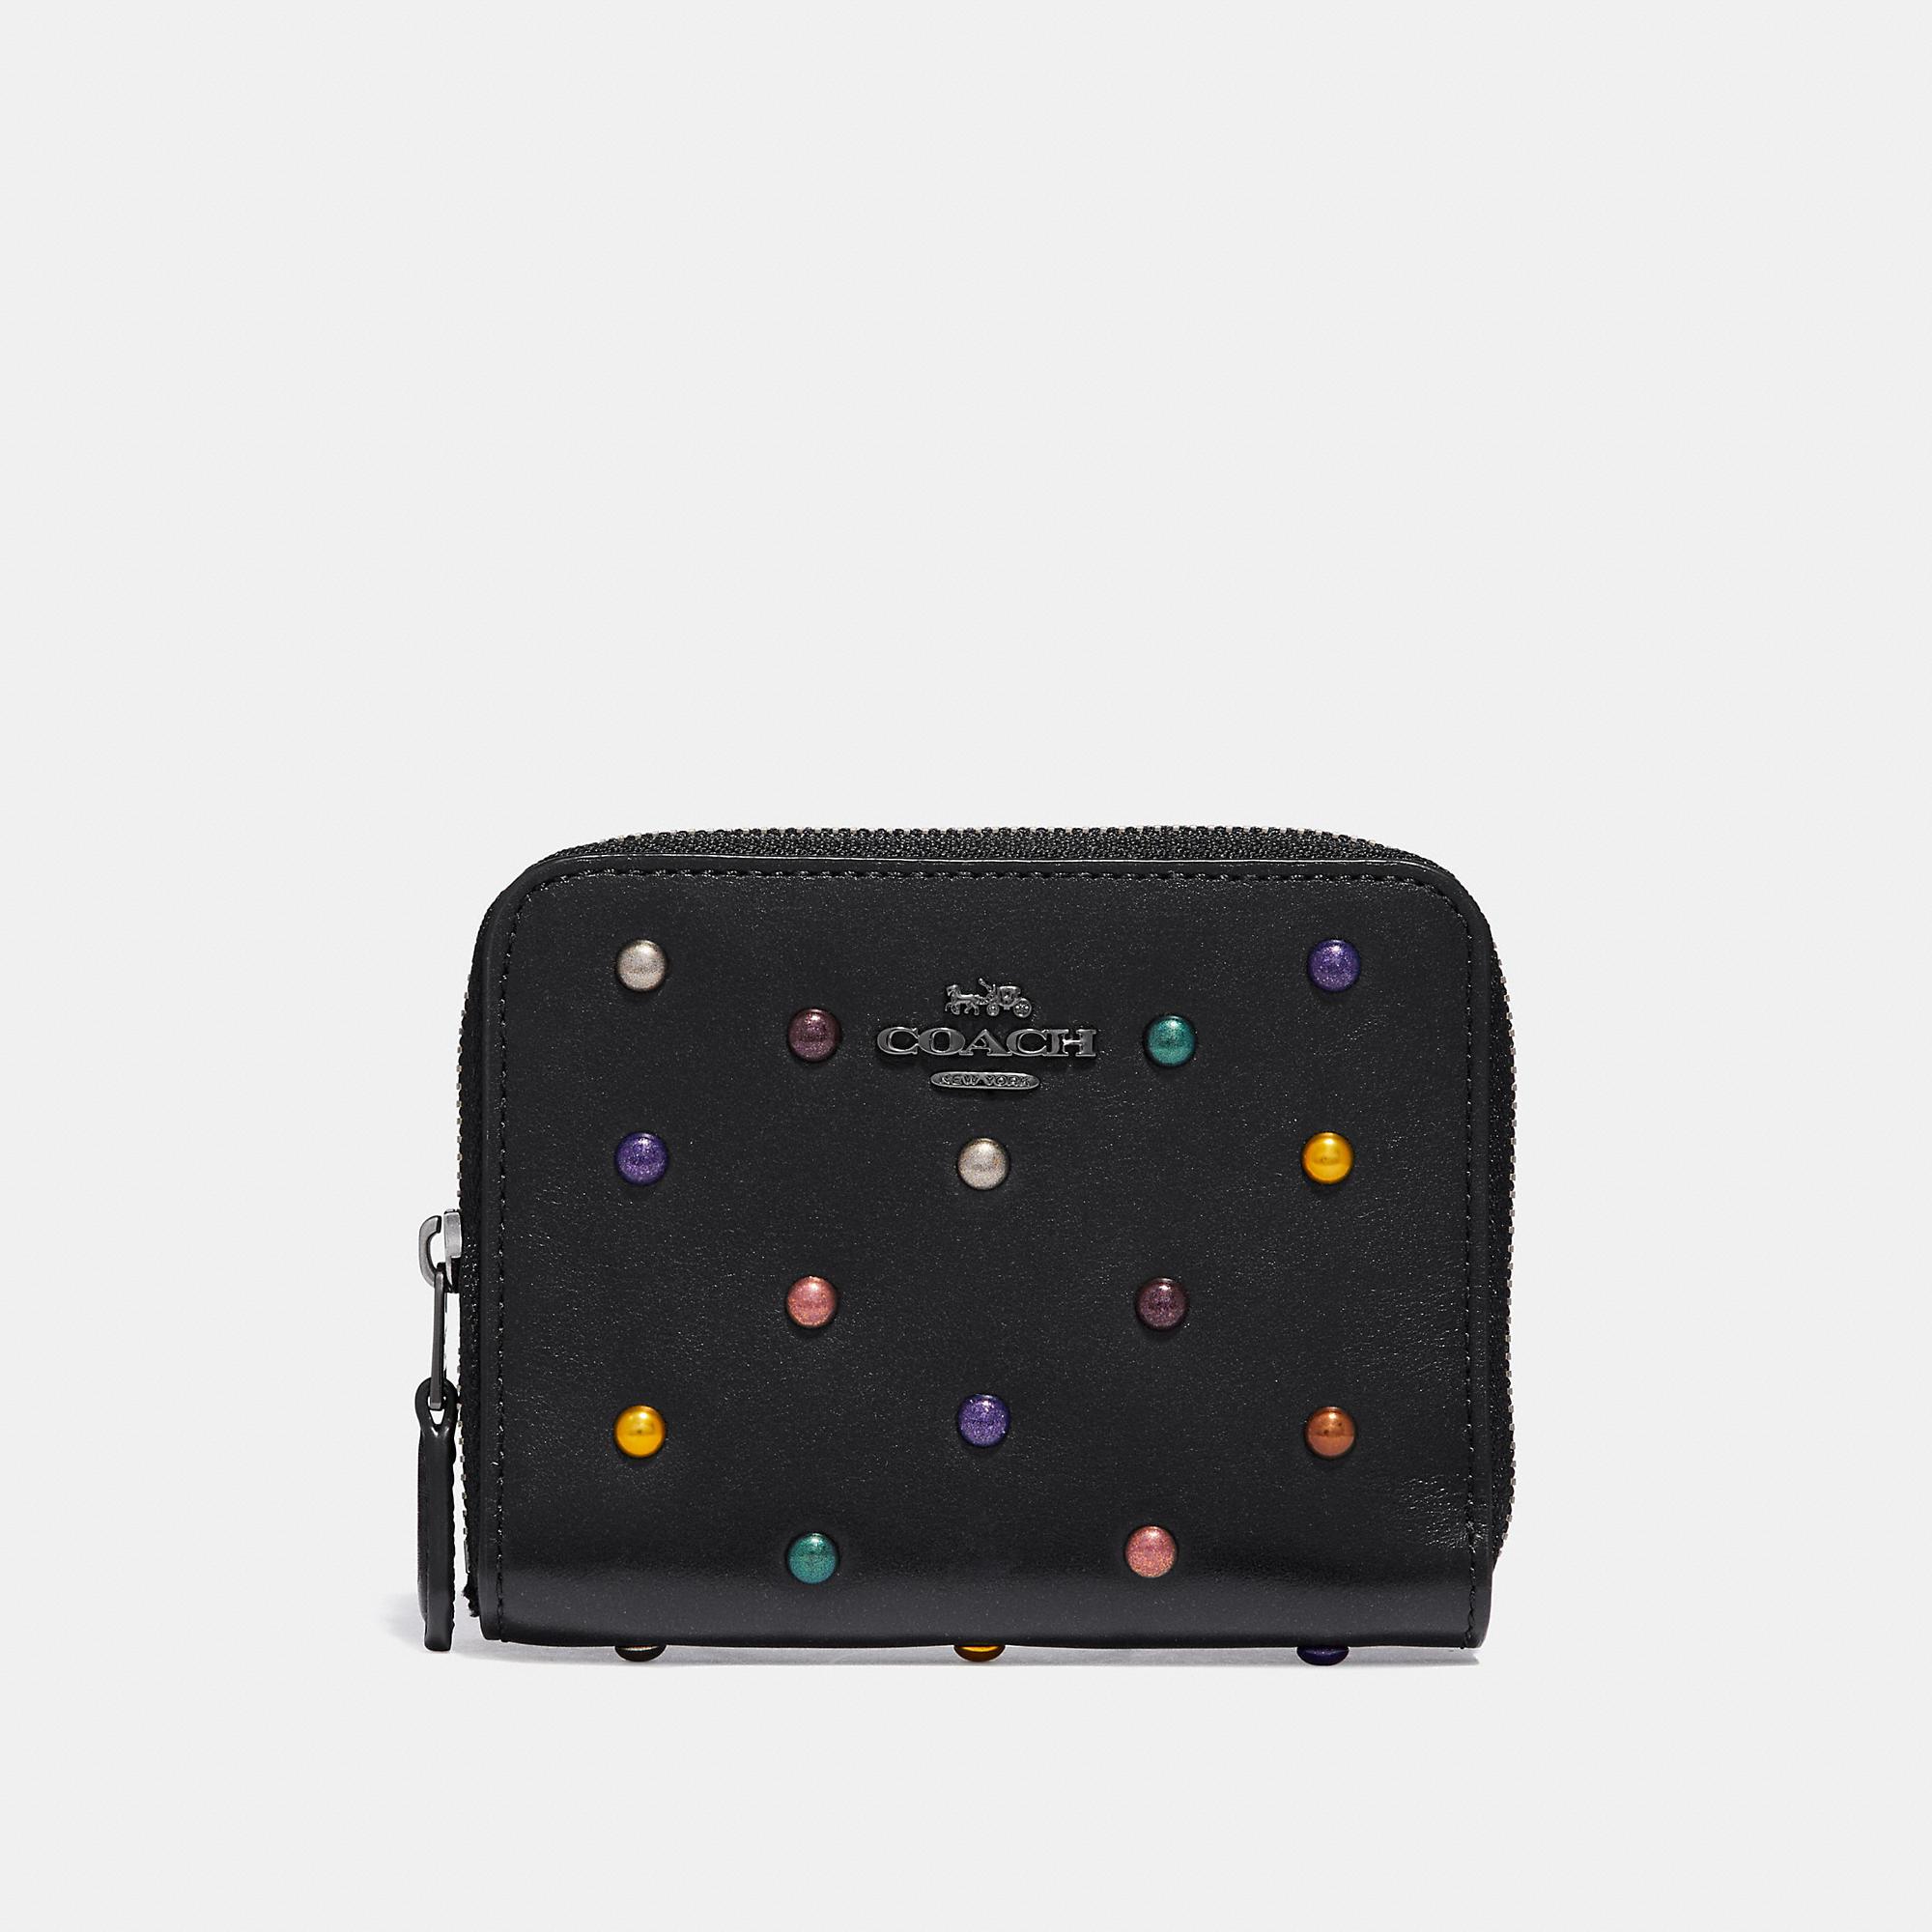 COACH Leather Rainbow Rivets Small Zip Around Wallet in Black - Lyst